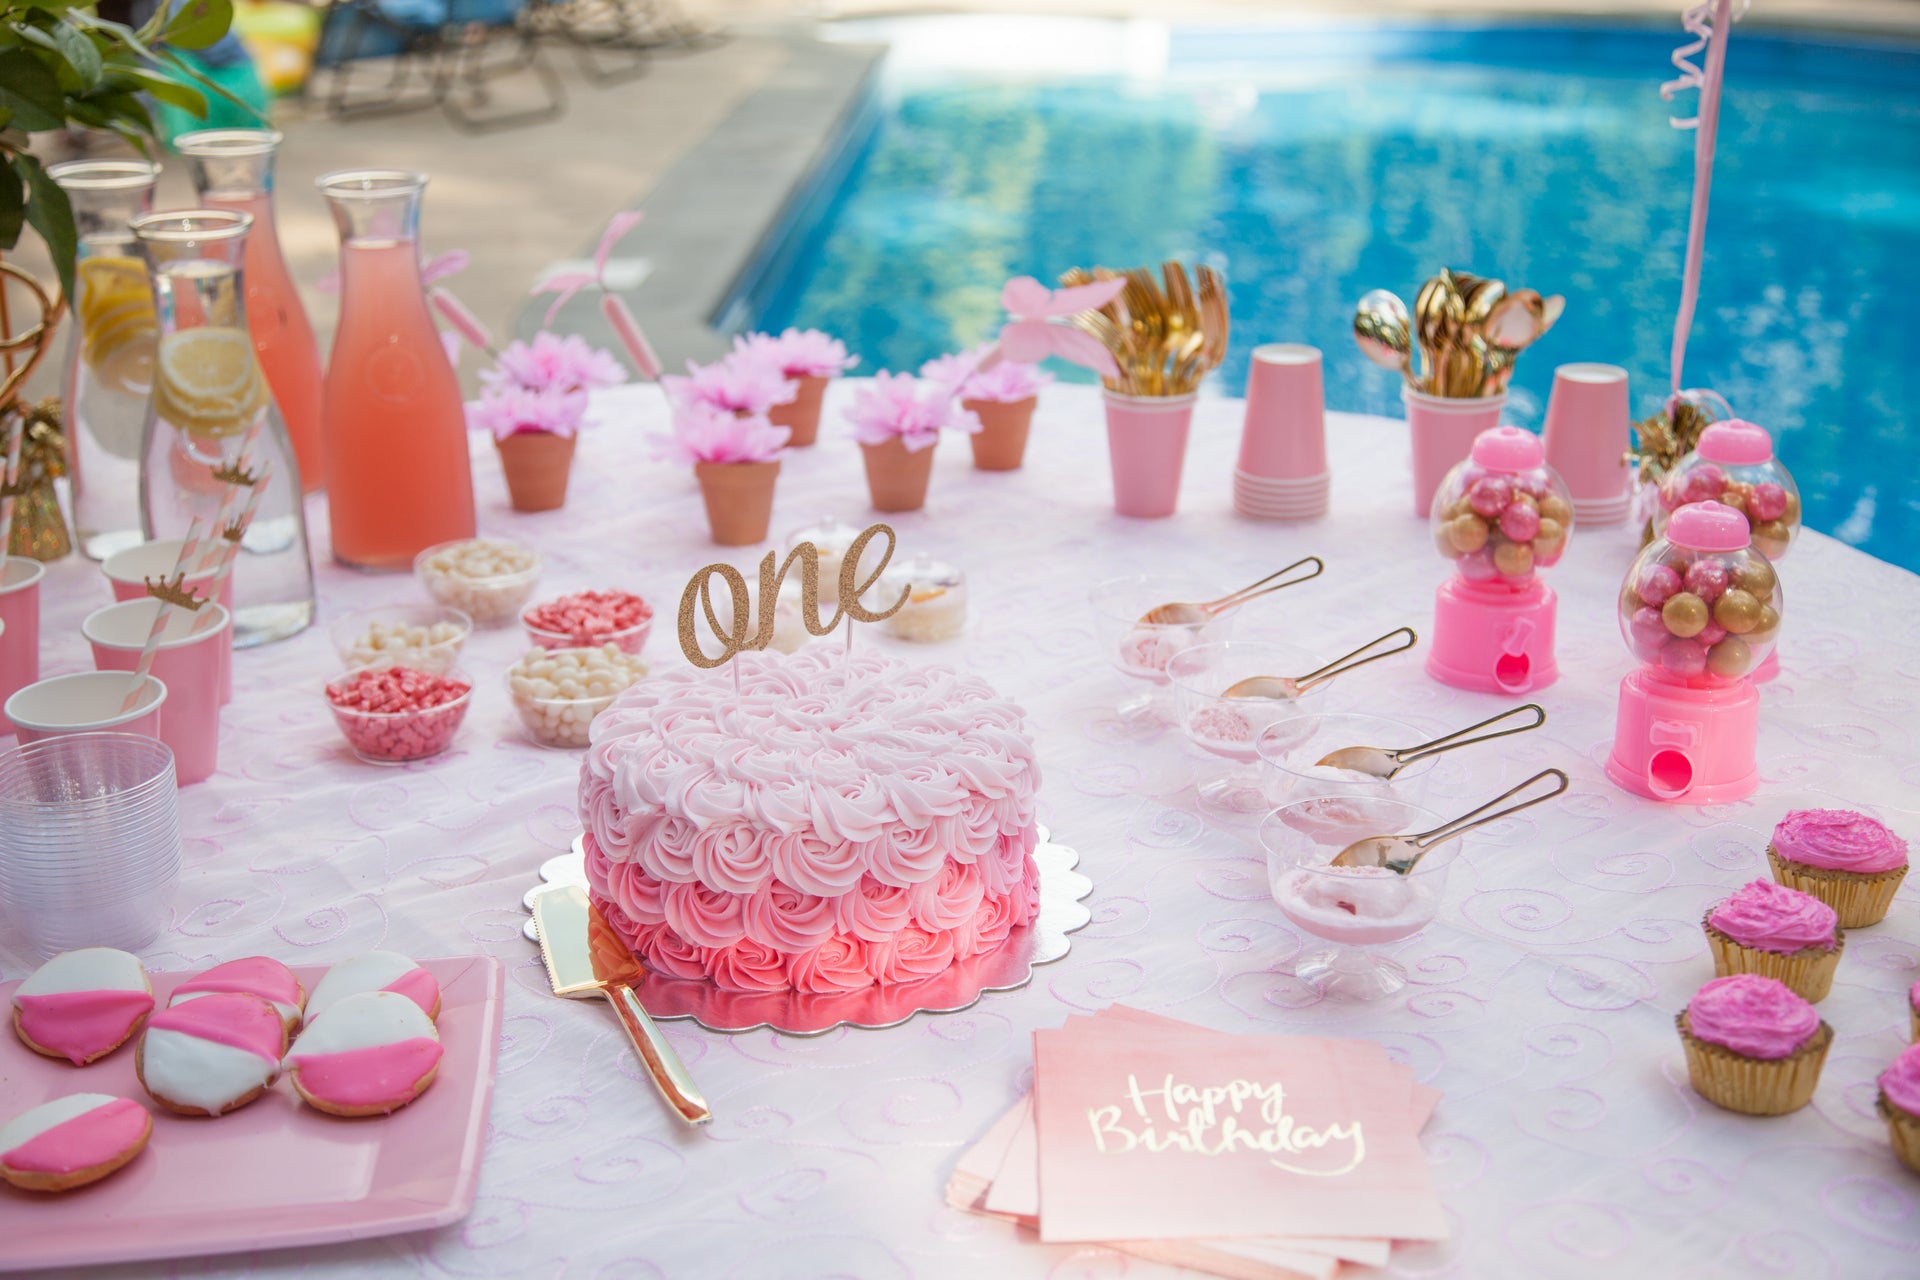 Pink-a-licious: Styling a Princess Birthday Party Tablescape?